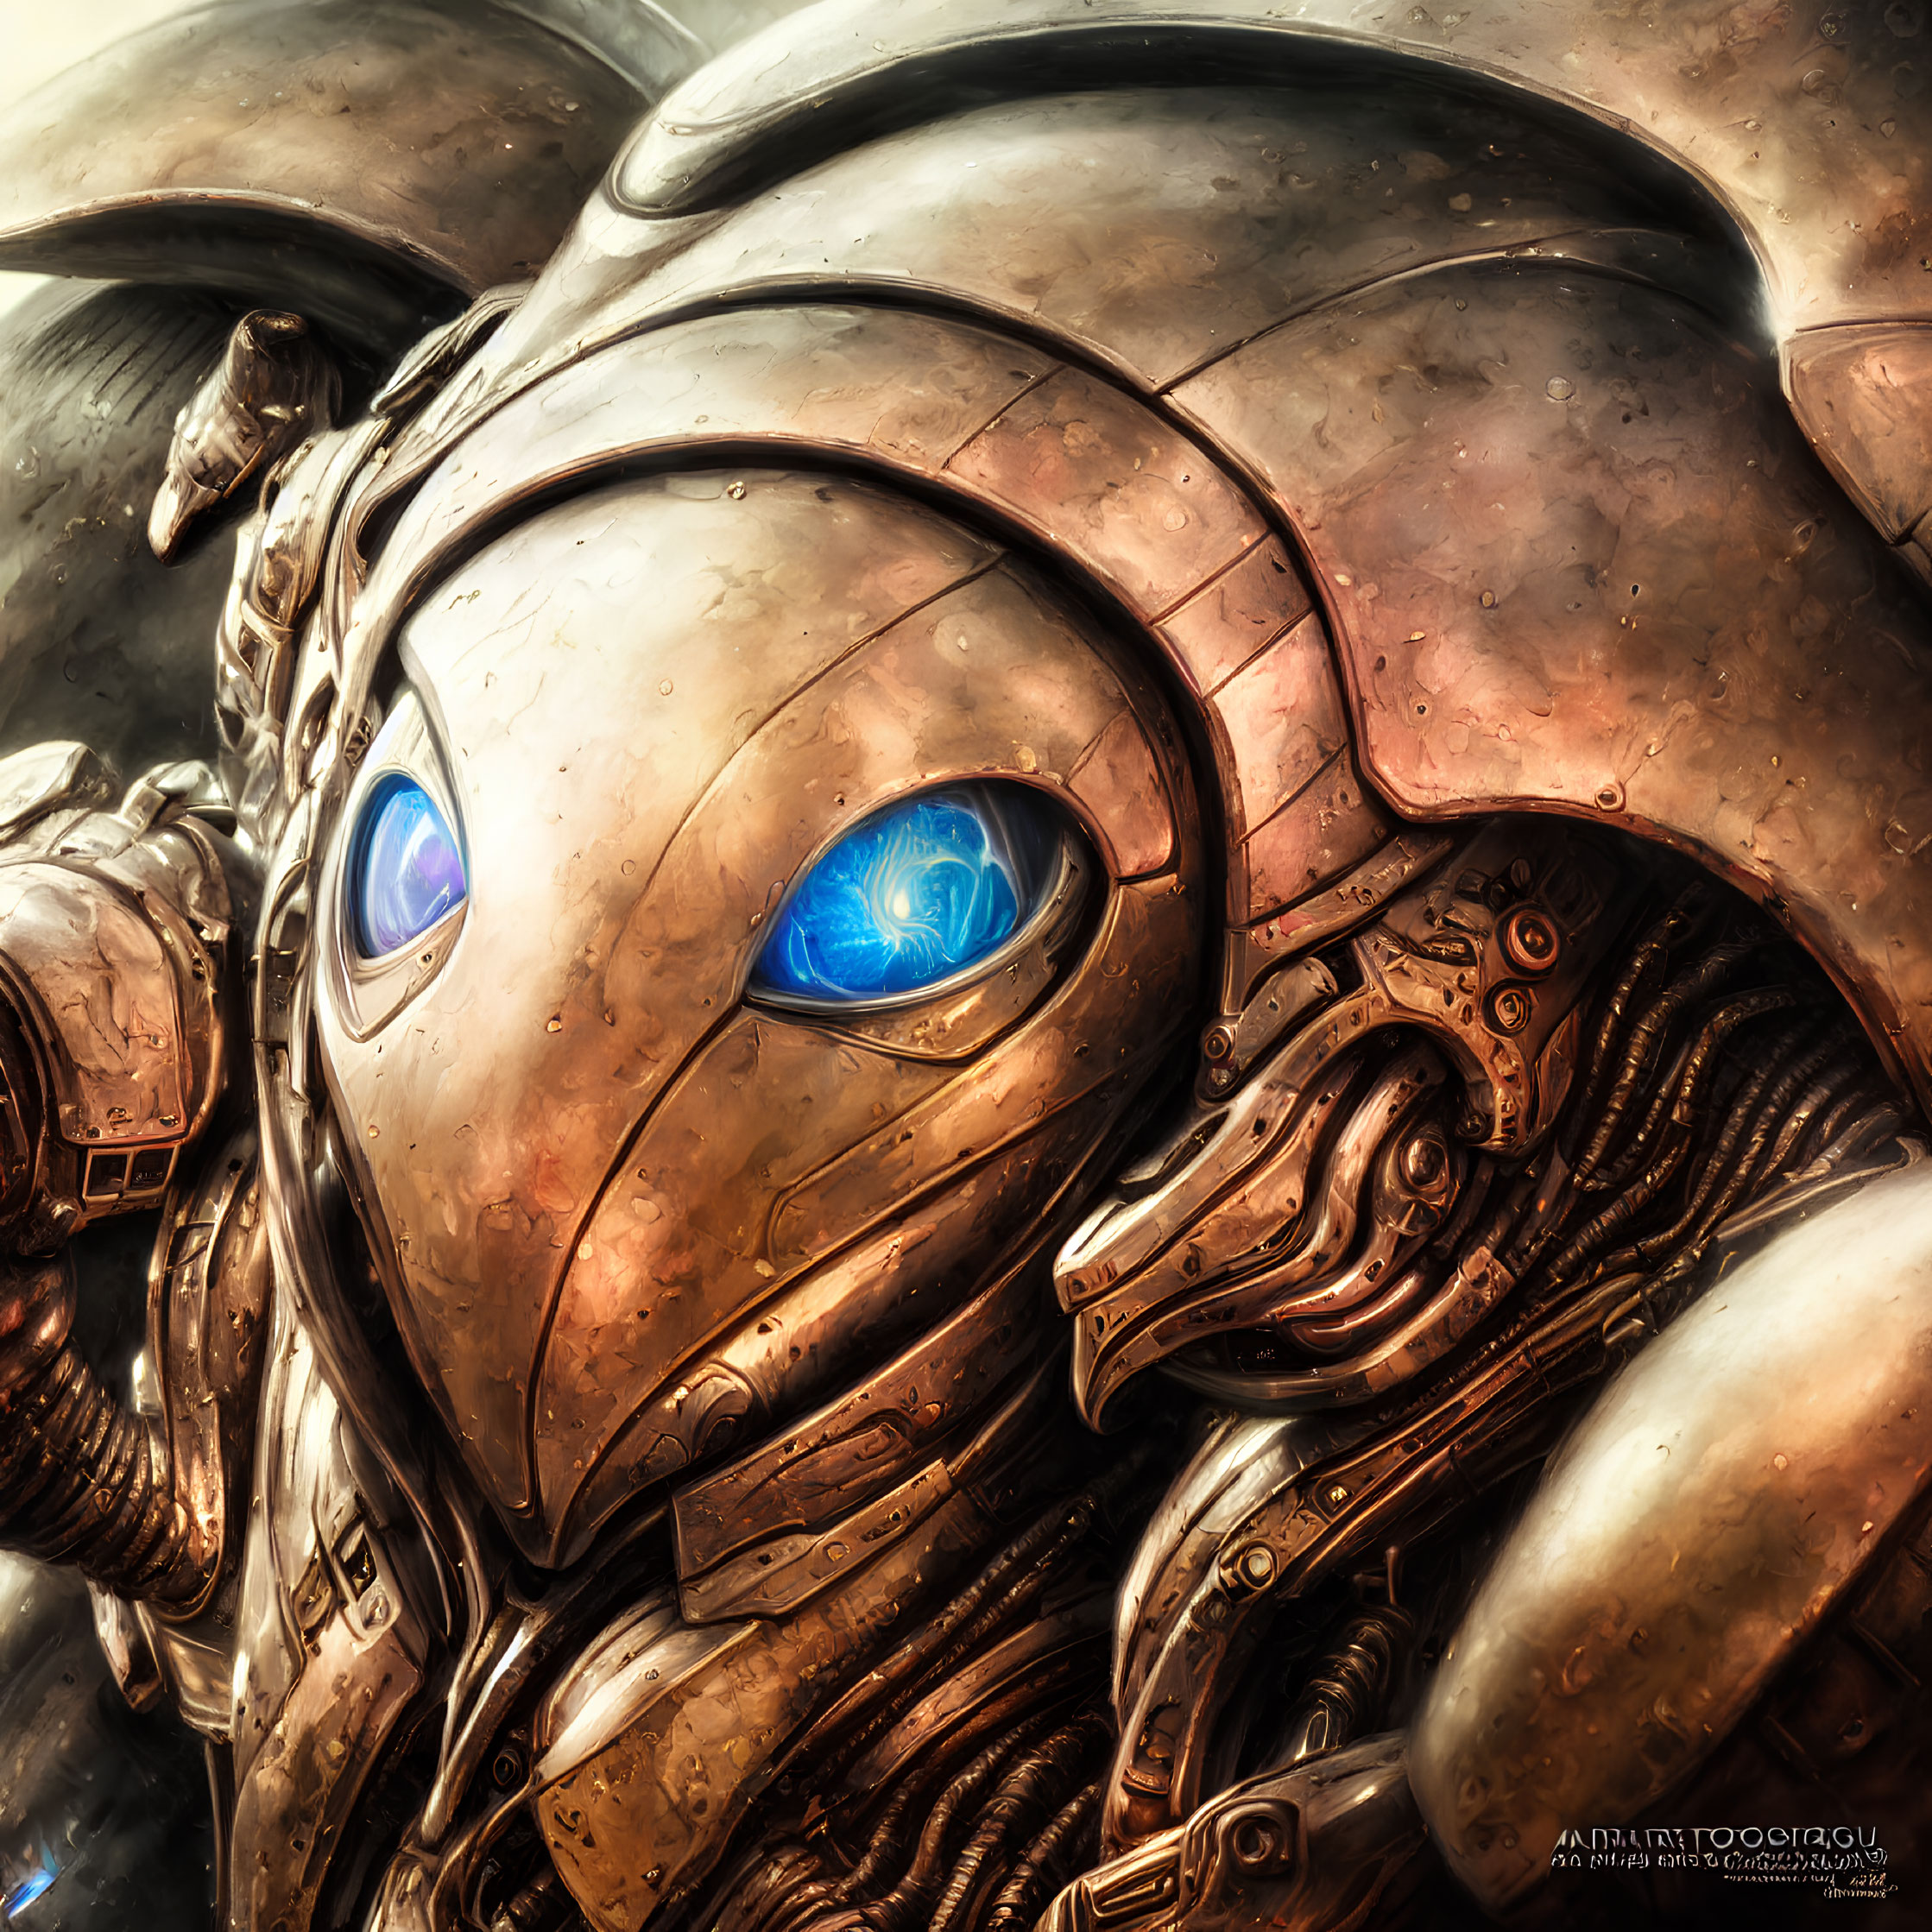 Detailed robotic face with glowing blue eyes and intricate mechanical parts in worn metallic texture